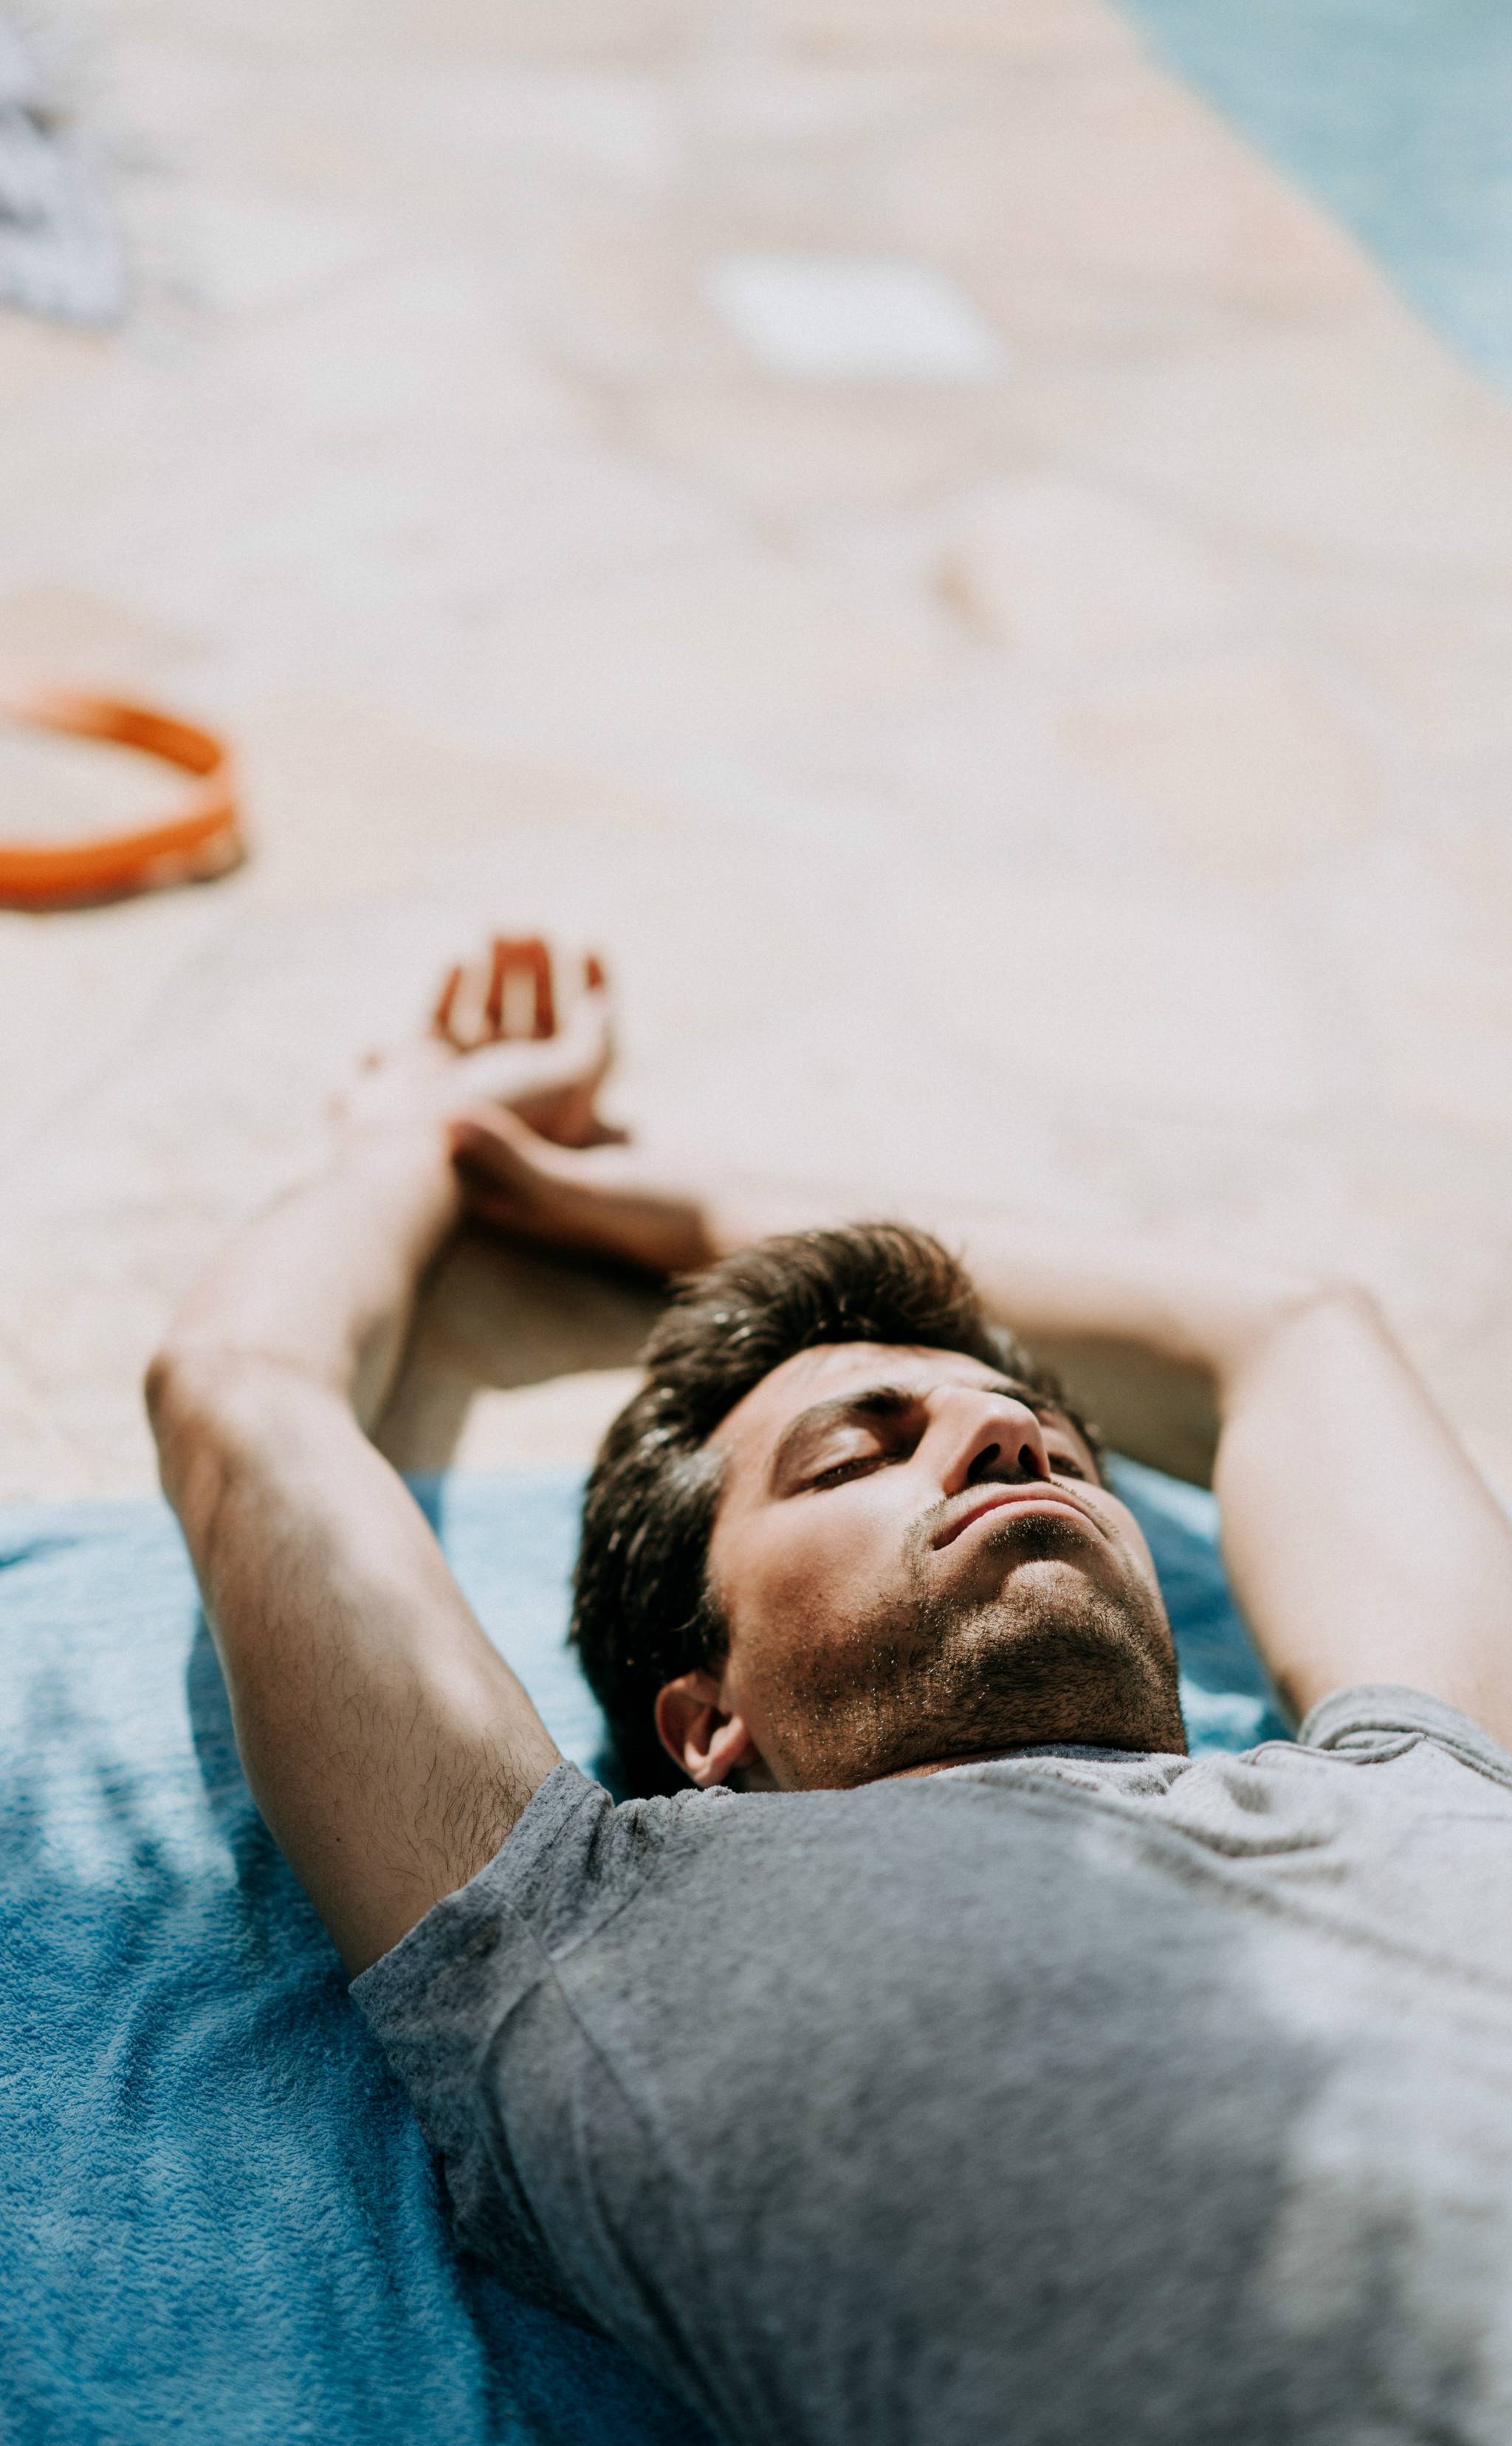 Why American men are embracing yoga